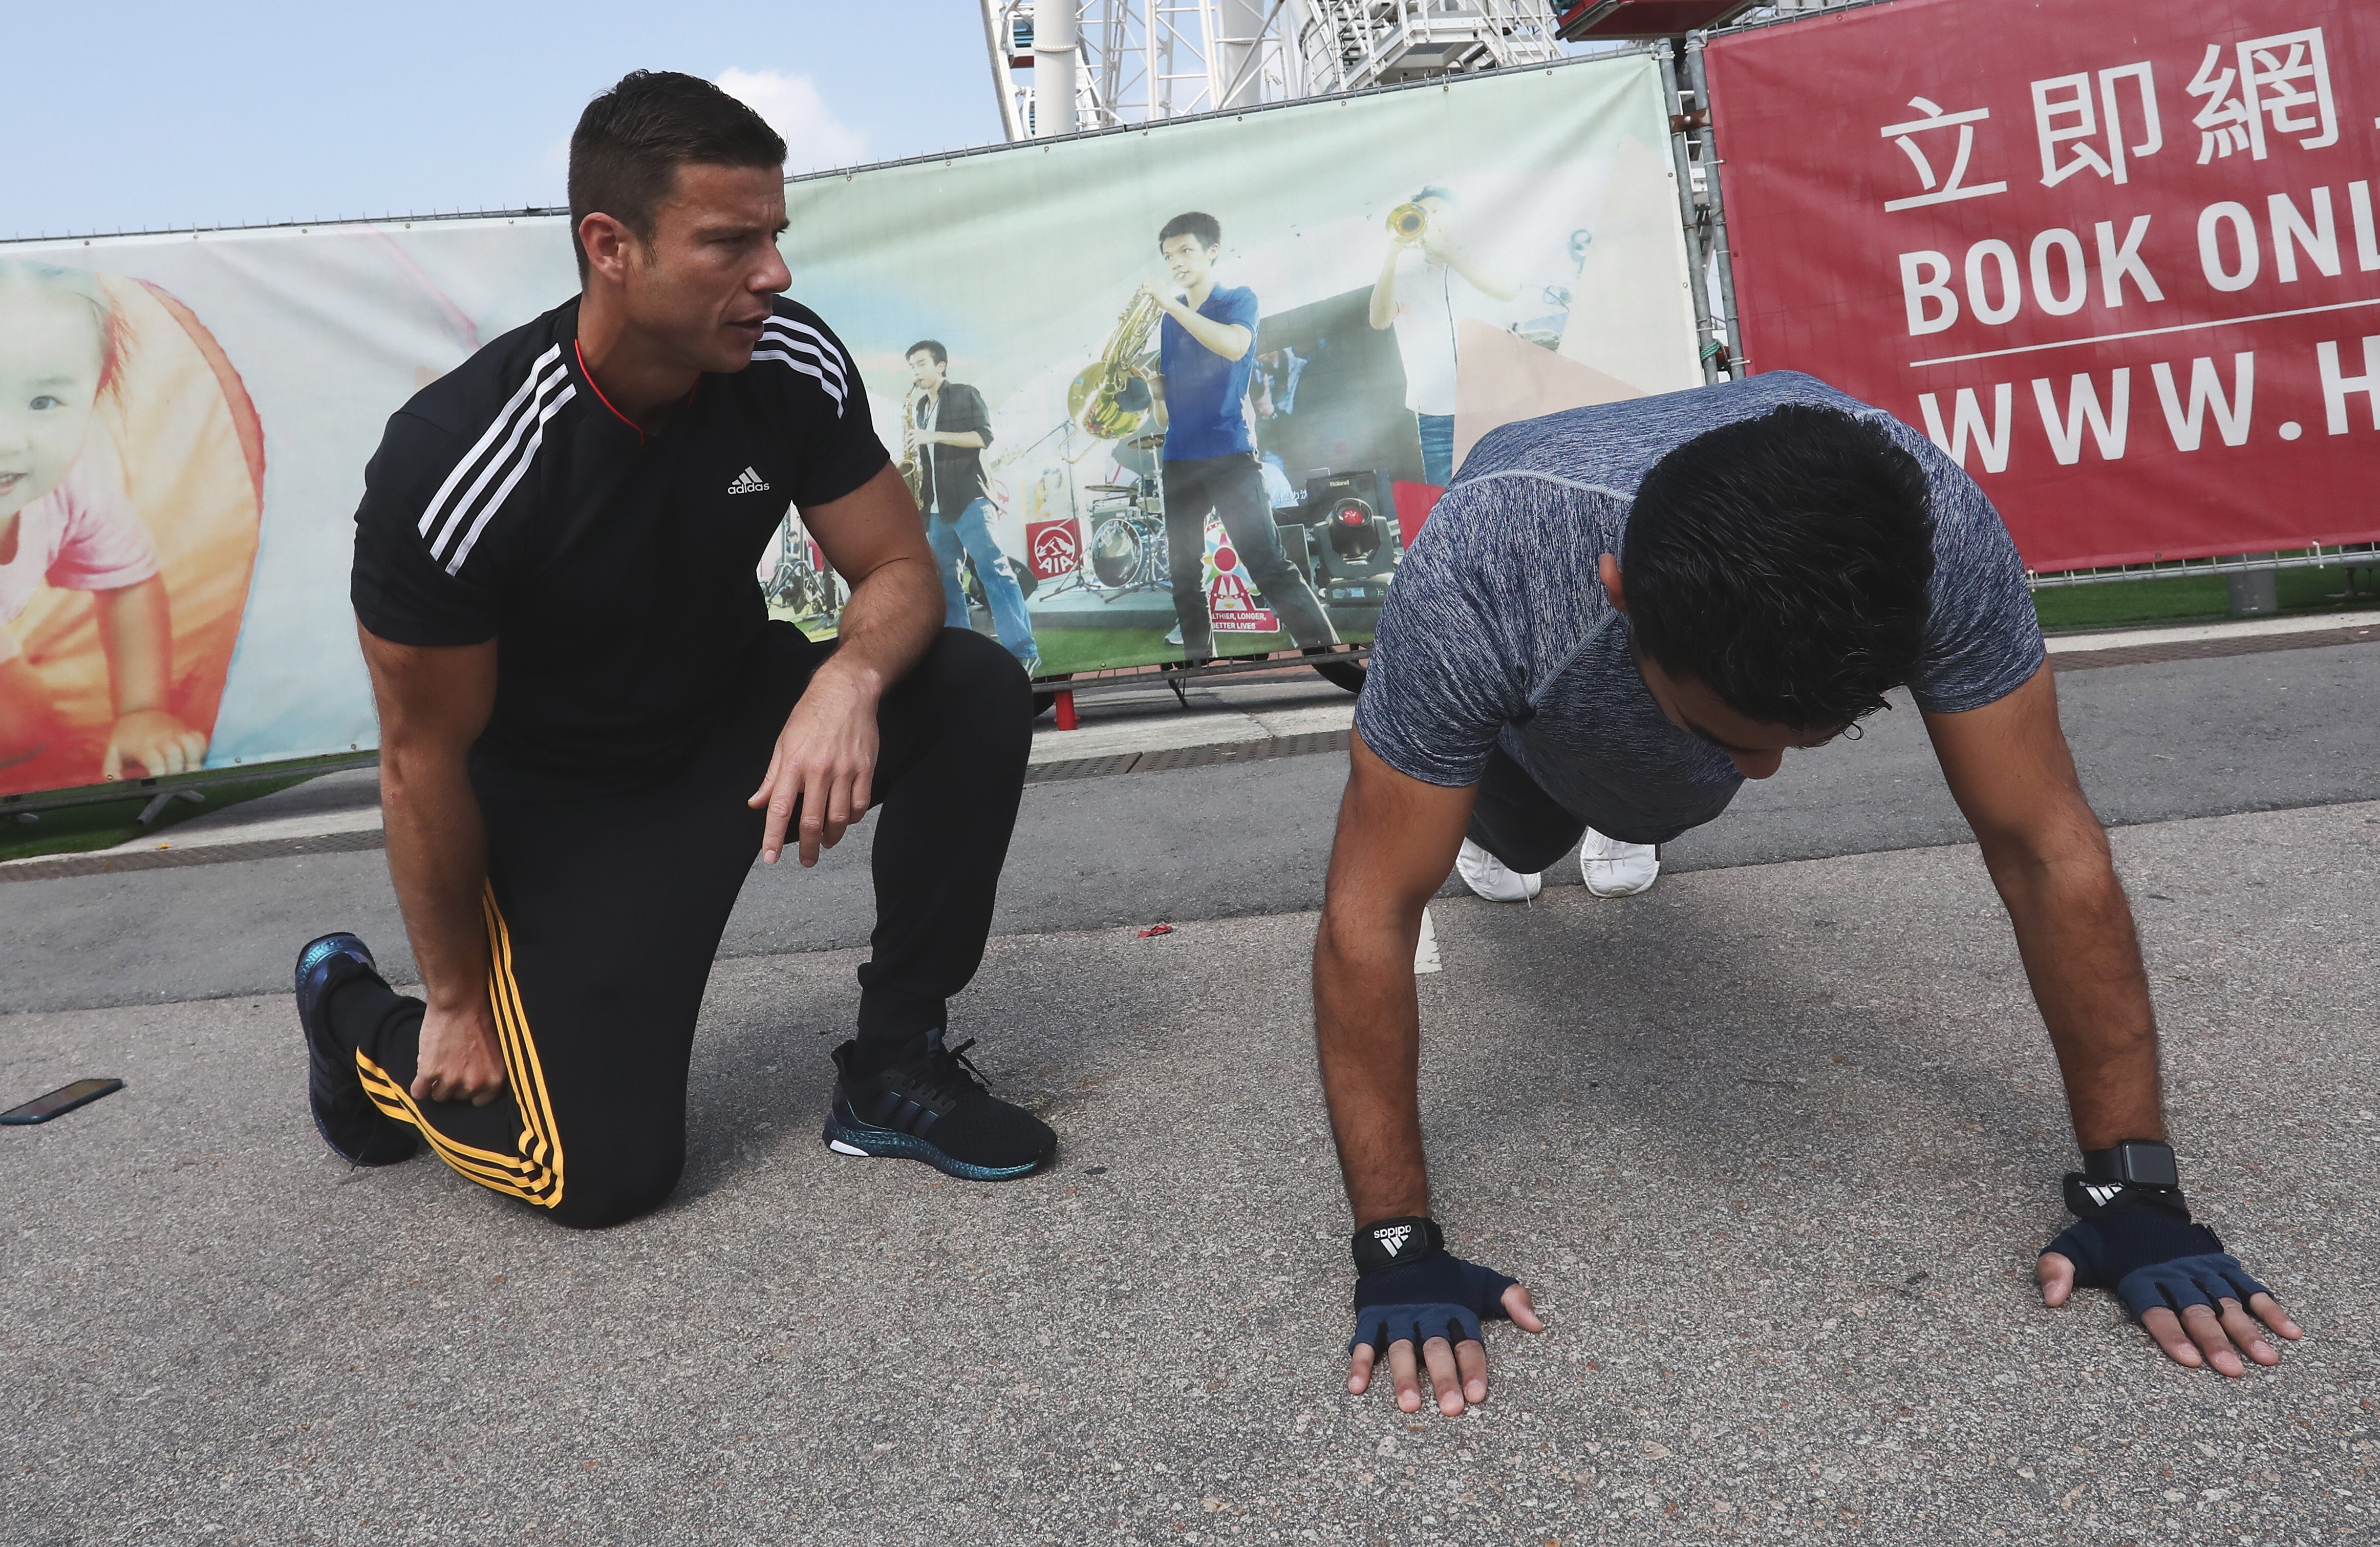 Personal trainer Ozgur “Ozzy” Irier hosts a personal training session with a client. Photo: Jonathan Wong